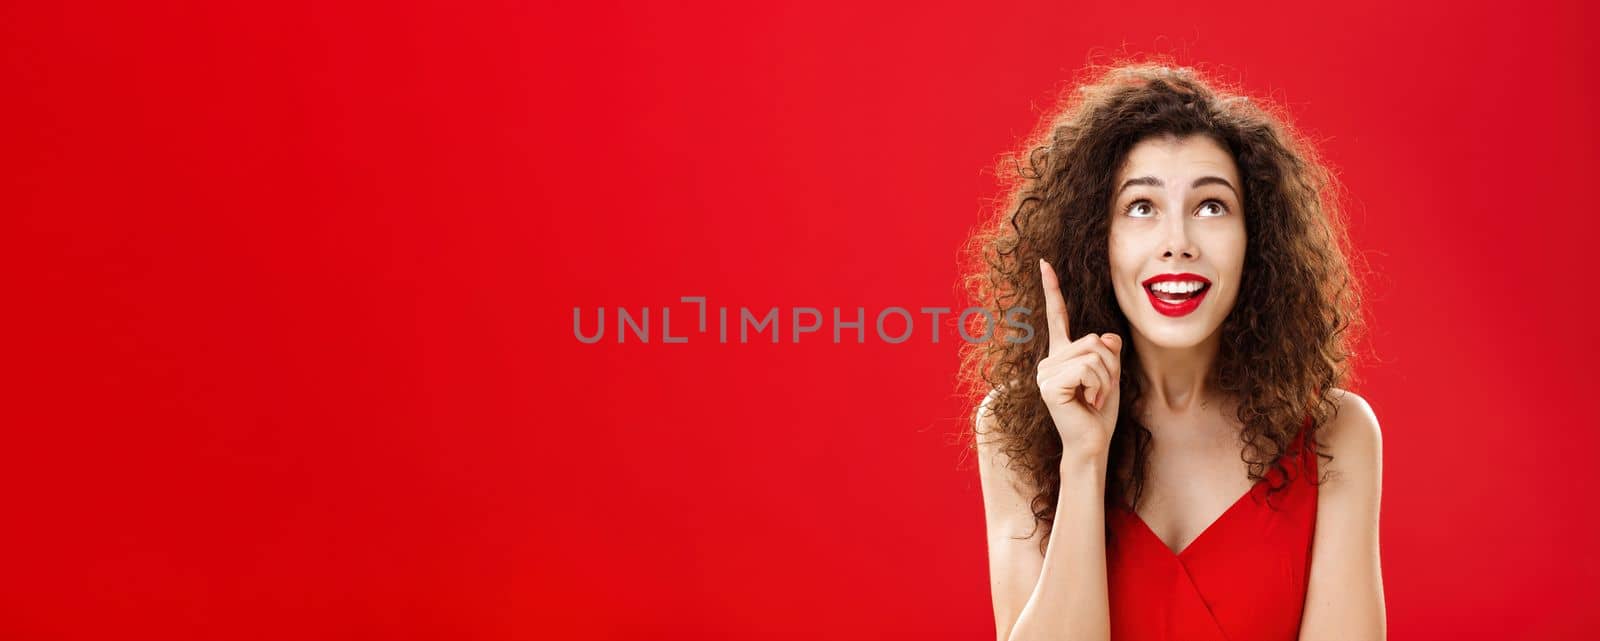 Portrait of delighted charming silly female with curly hairstyle. in dress raising index finger in eureka gesture smiling happily looking up having great plan or idea posing charismatic over red wall.